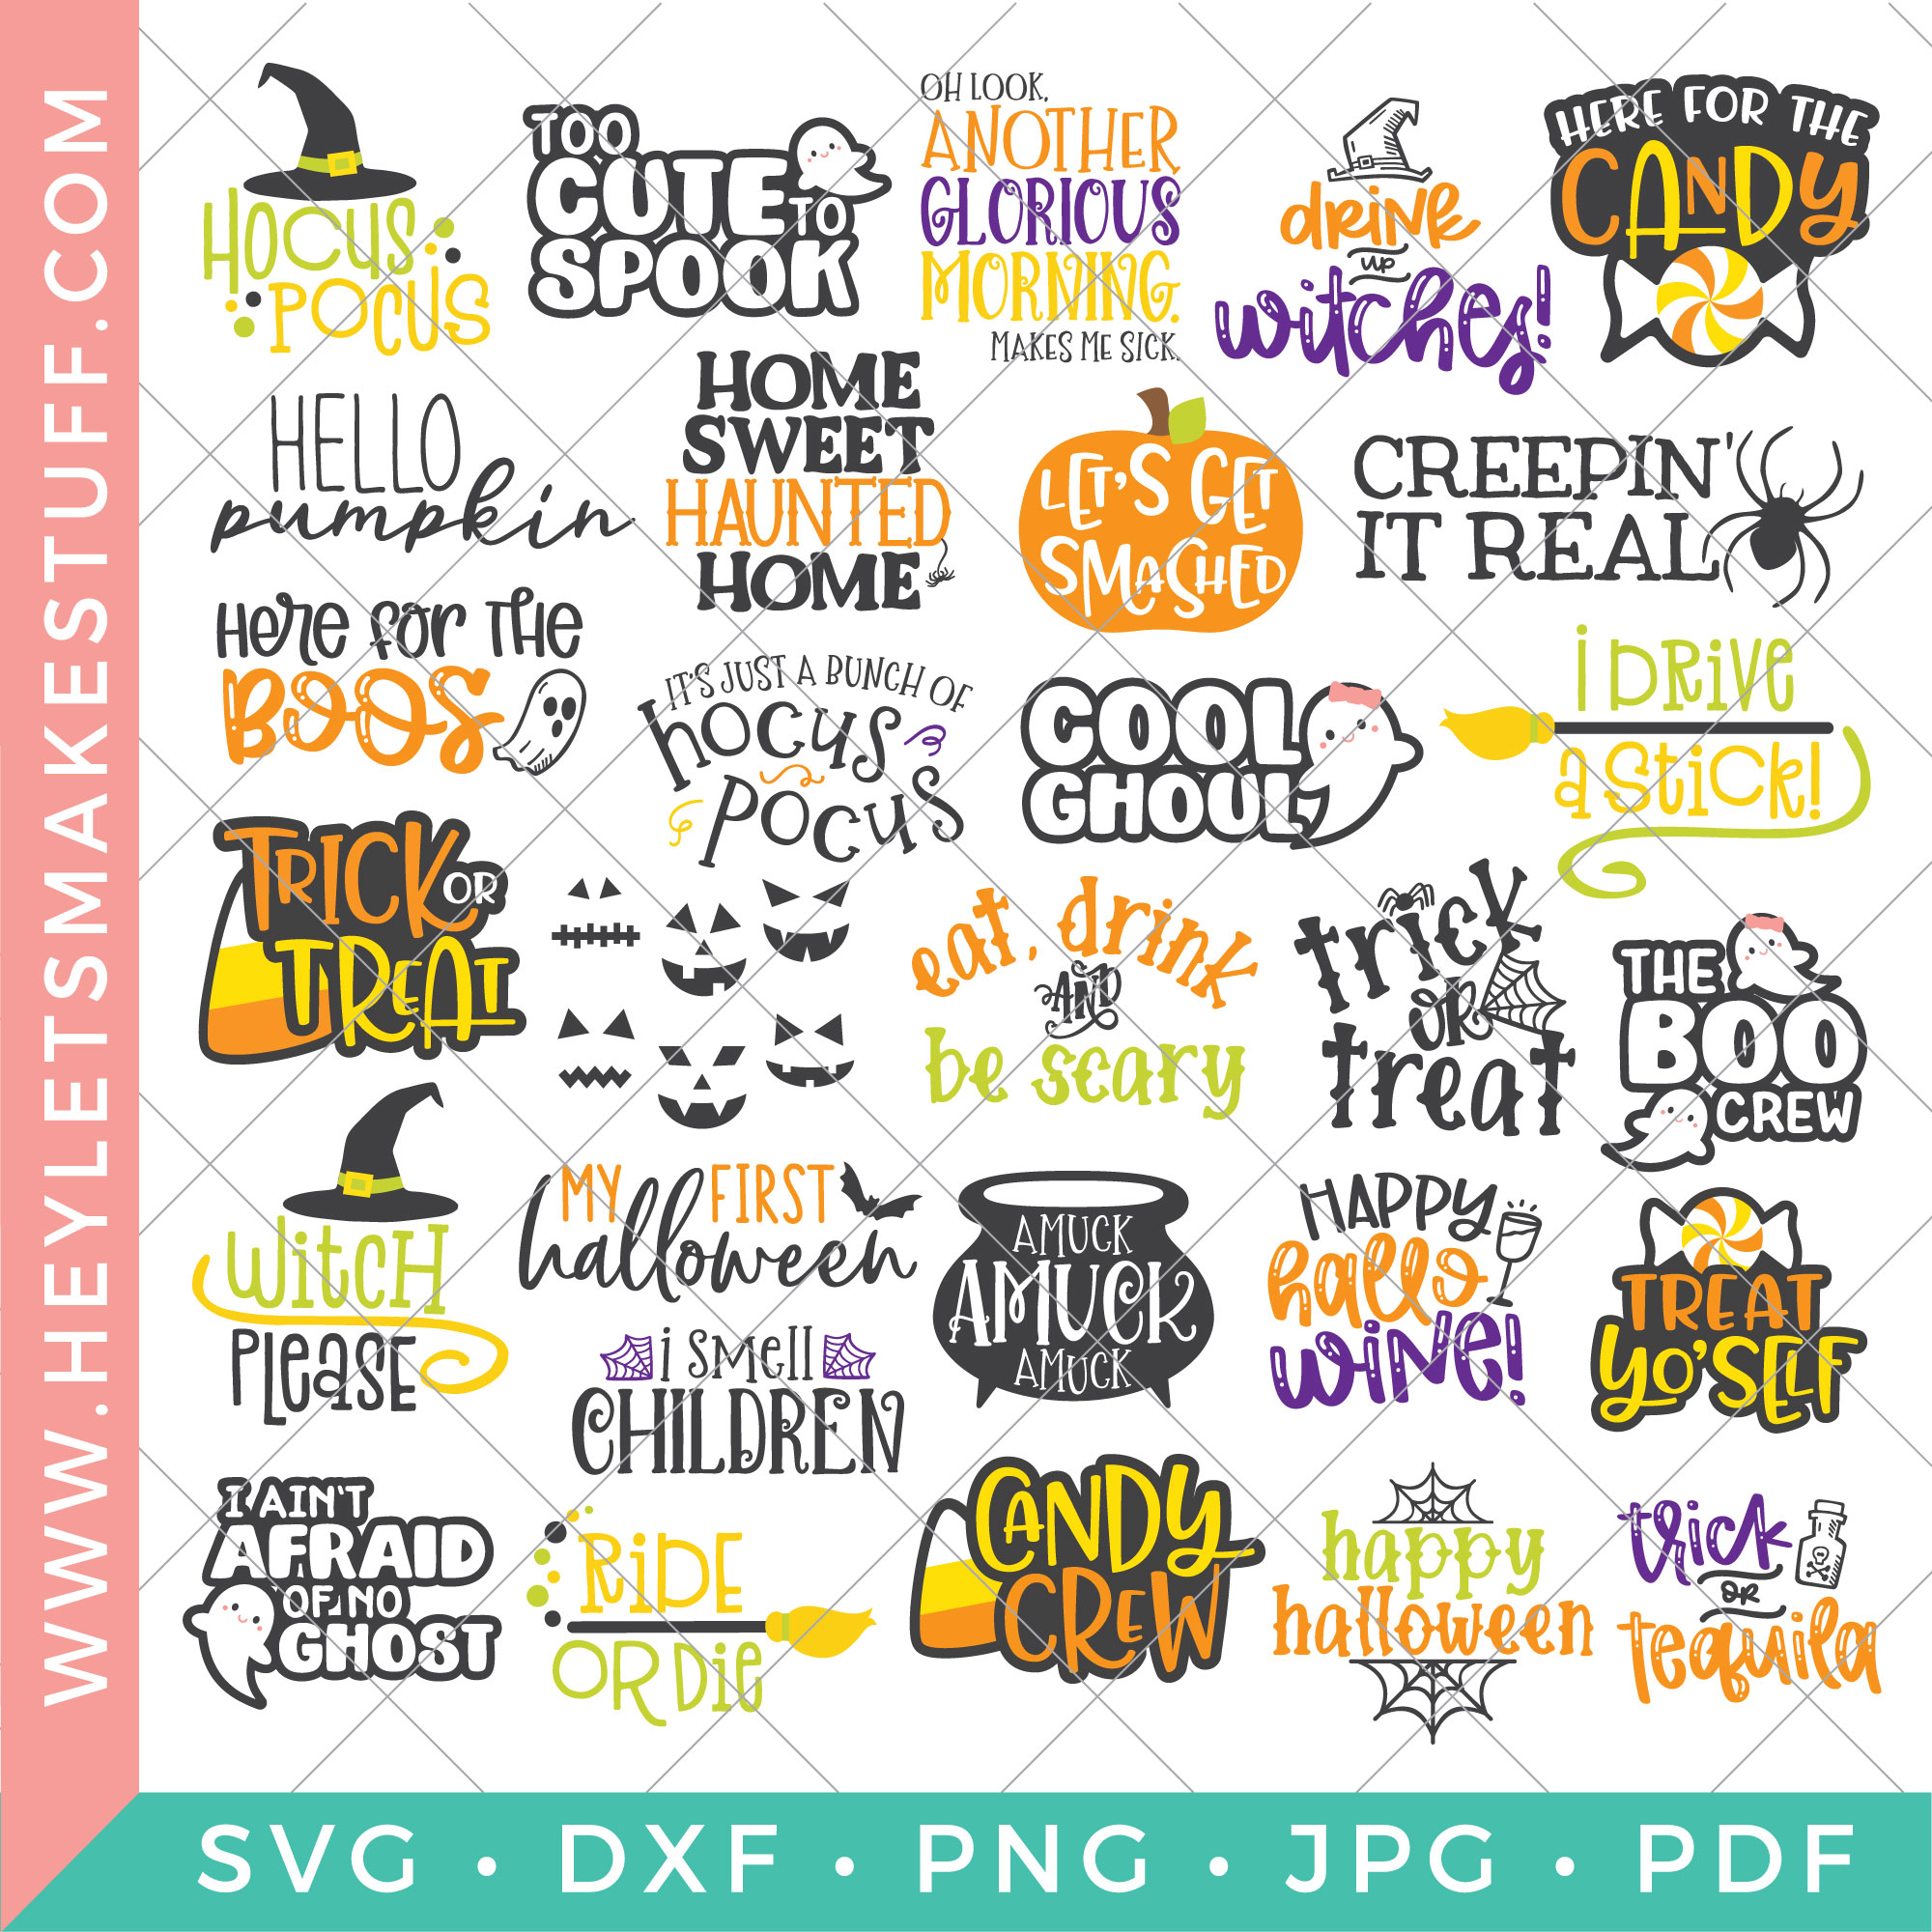 The BIG Halloween SVG Bundle - 29 SVGs from Hey, Let's Make Stuff!